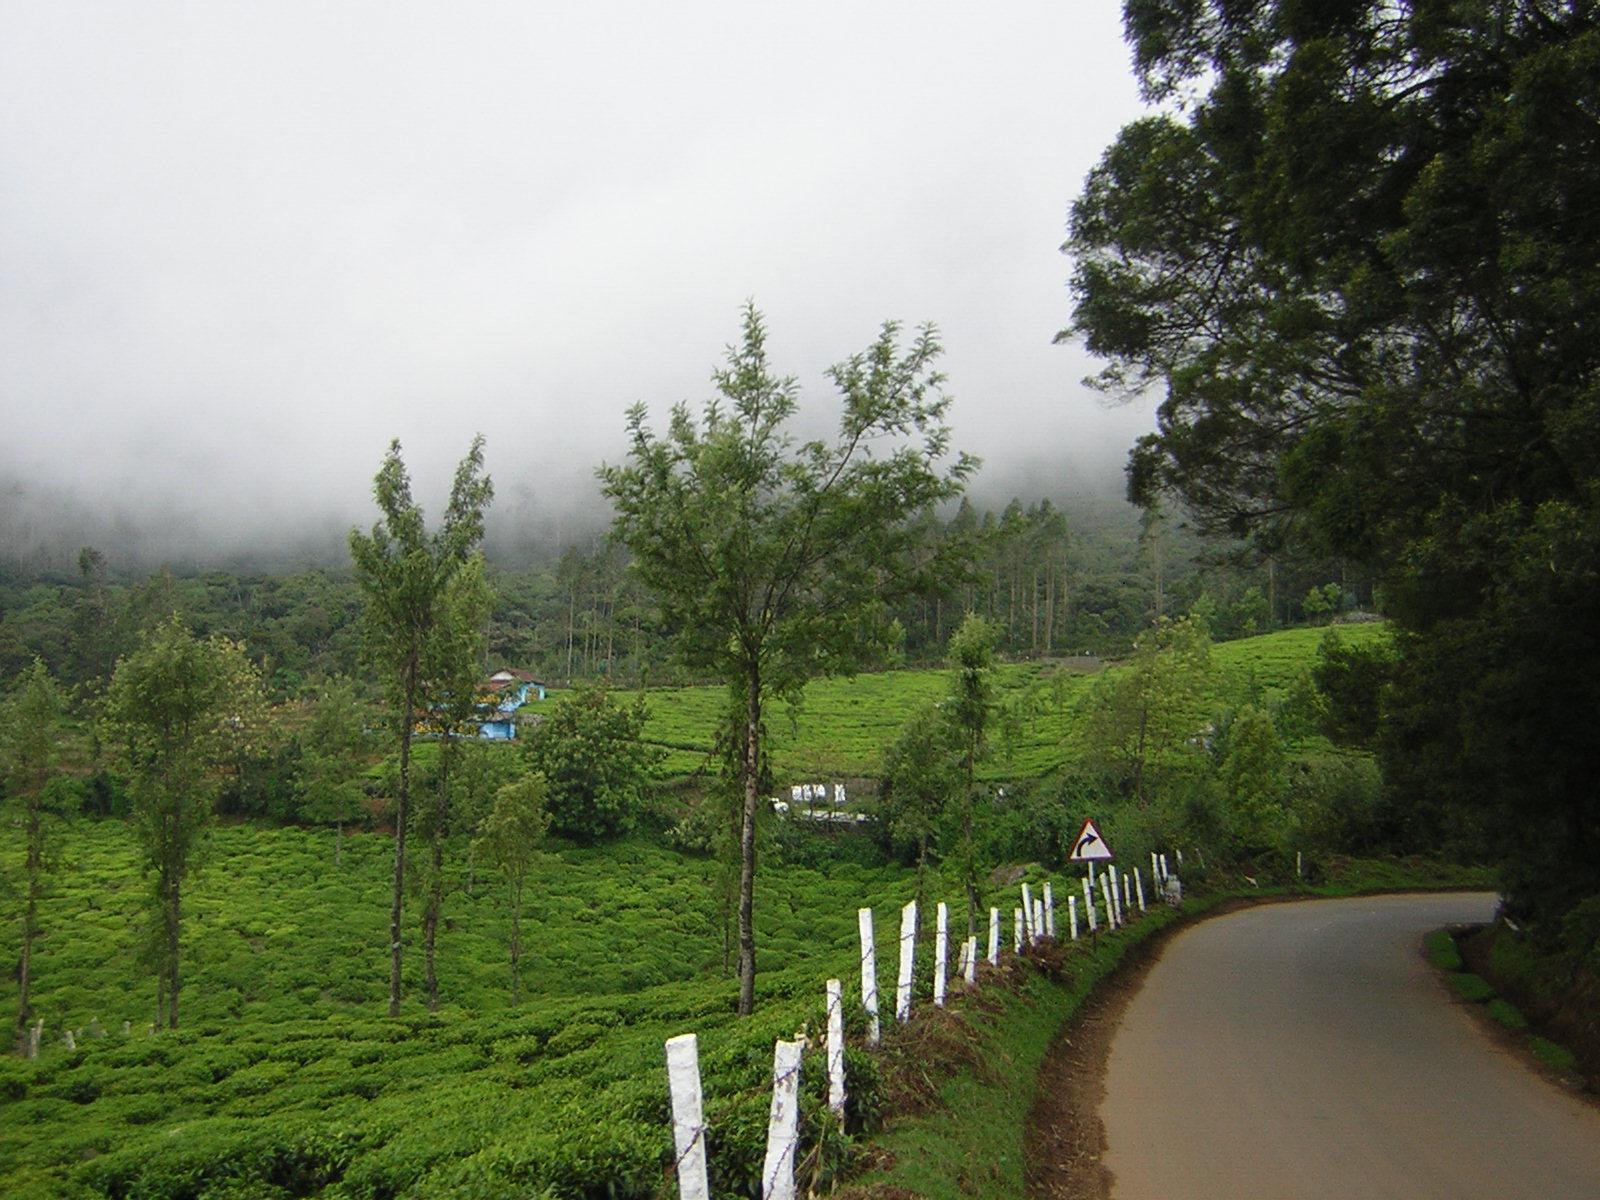 Ooty Picture Ooty Travel Photo, HD Travel Image